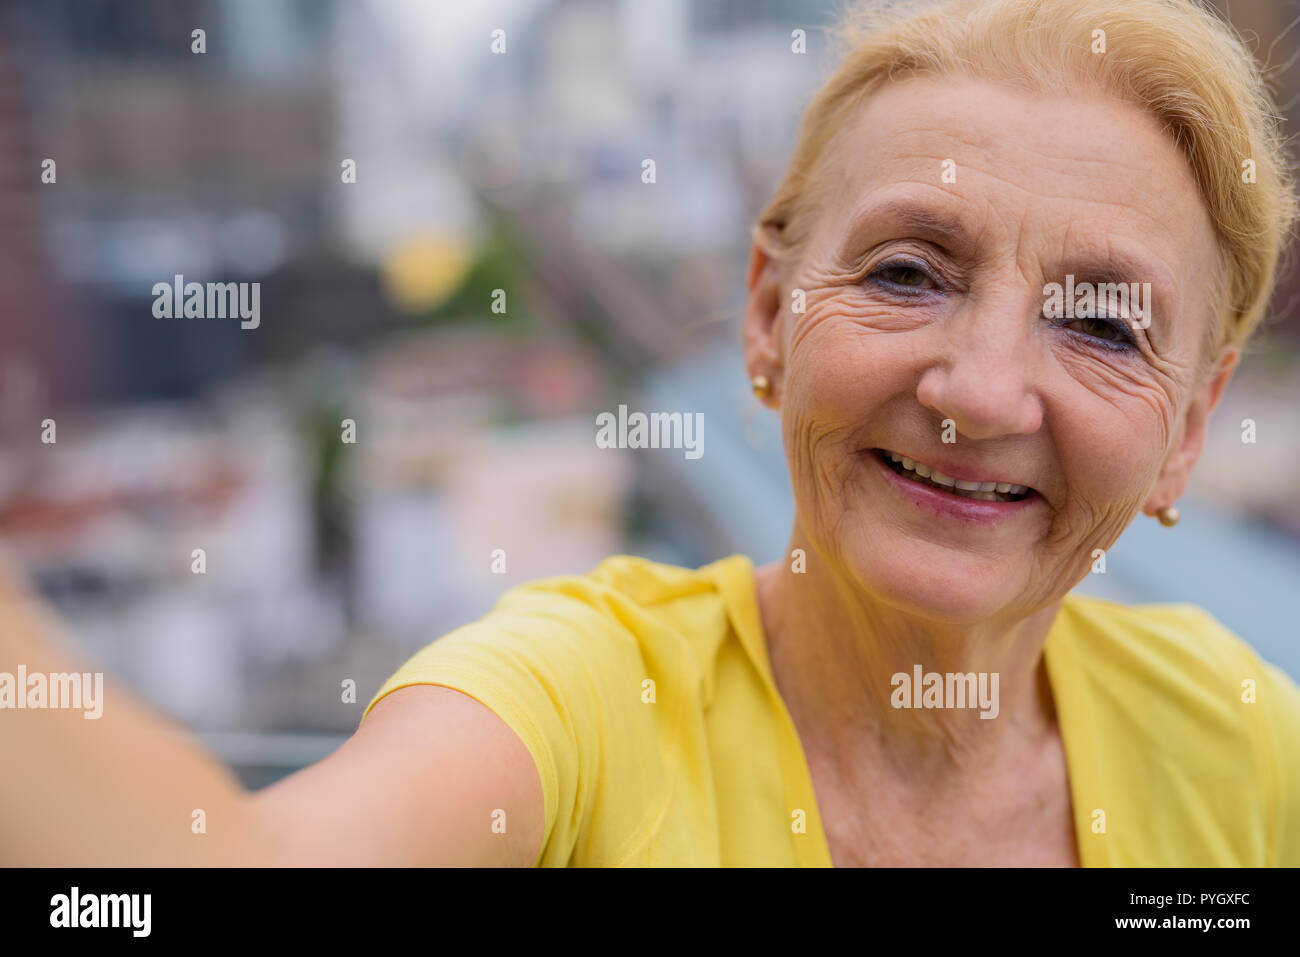 Personal point of view of senior woman taking selfie with mobile phone Stock Photo